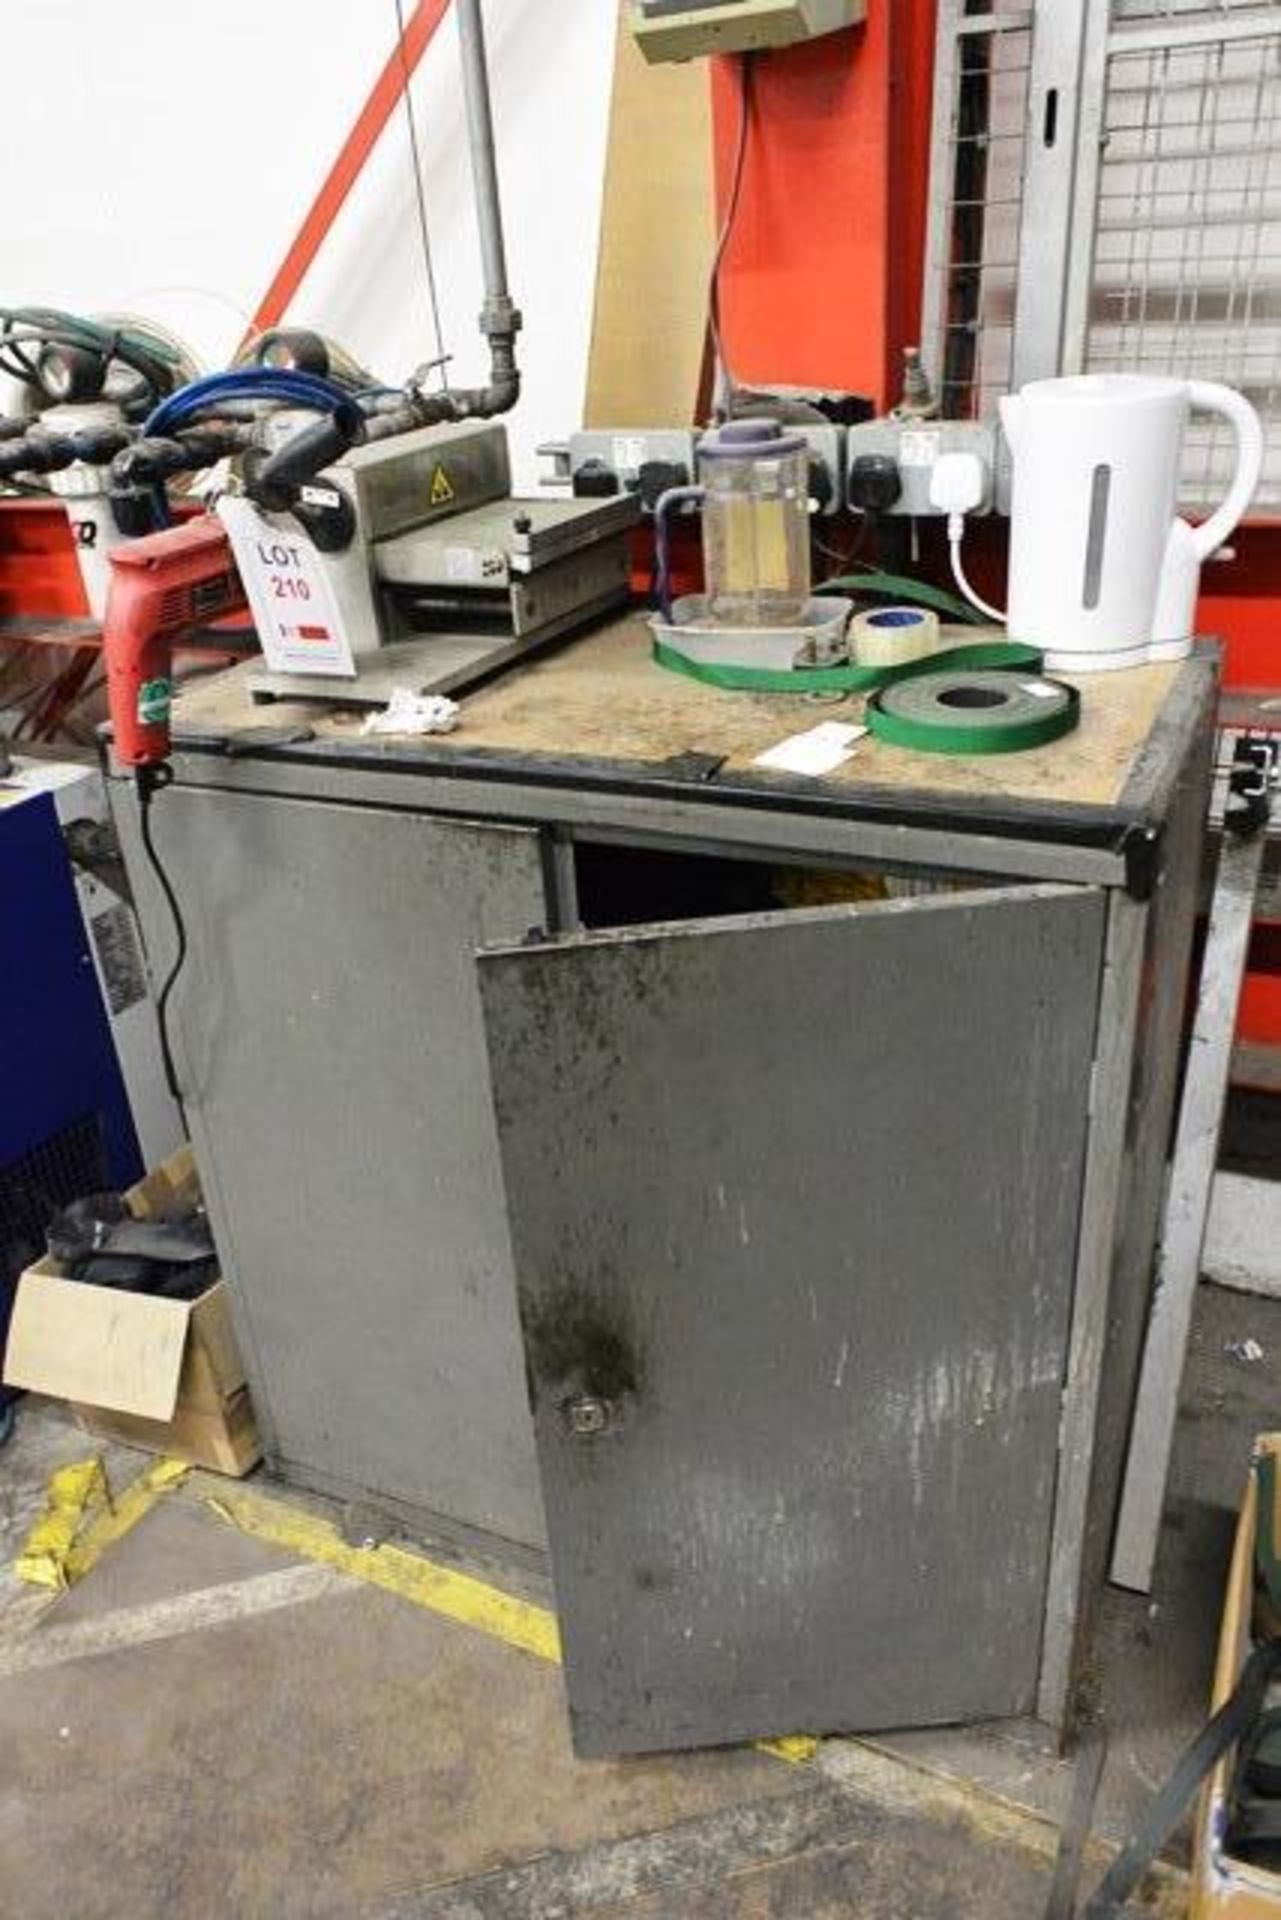 Steel frame 2 door cupboard and 240v roller/drill unit (out of commission, sold as spares/repairs